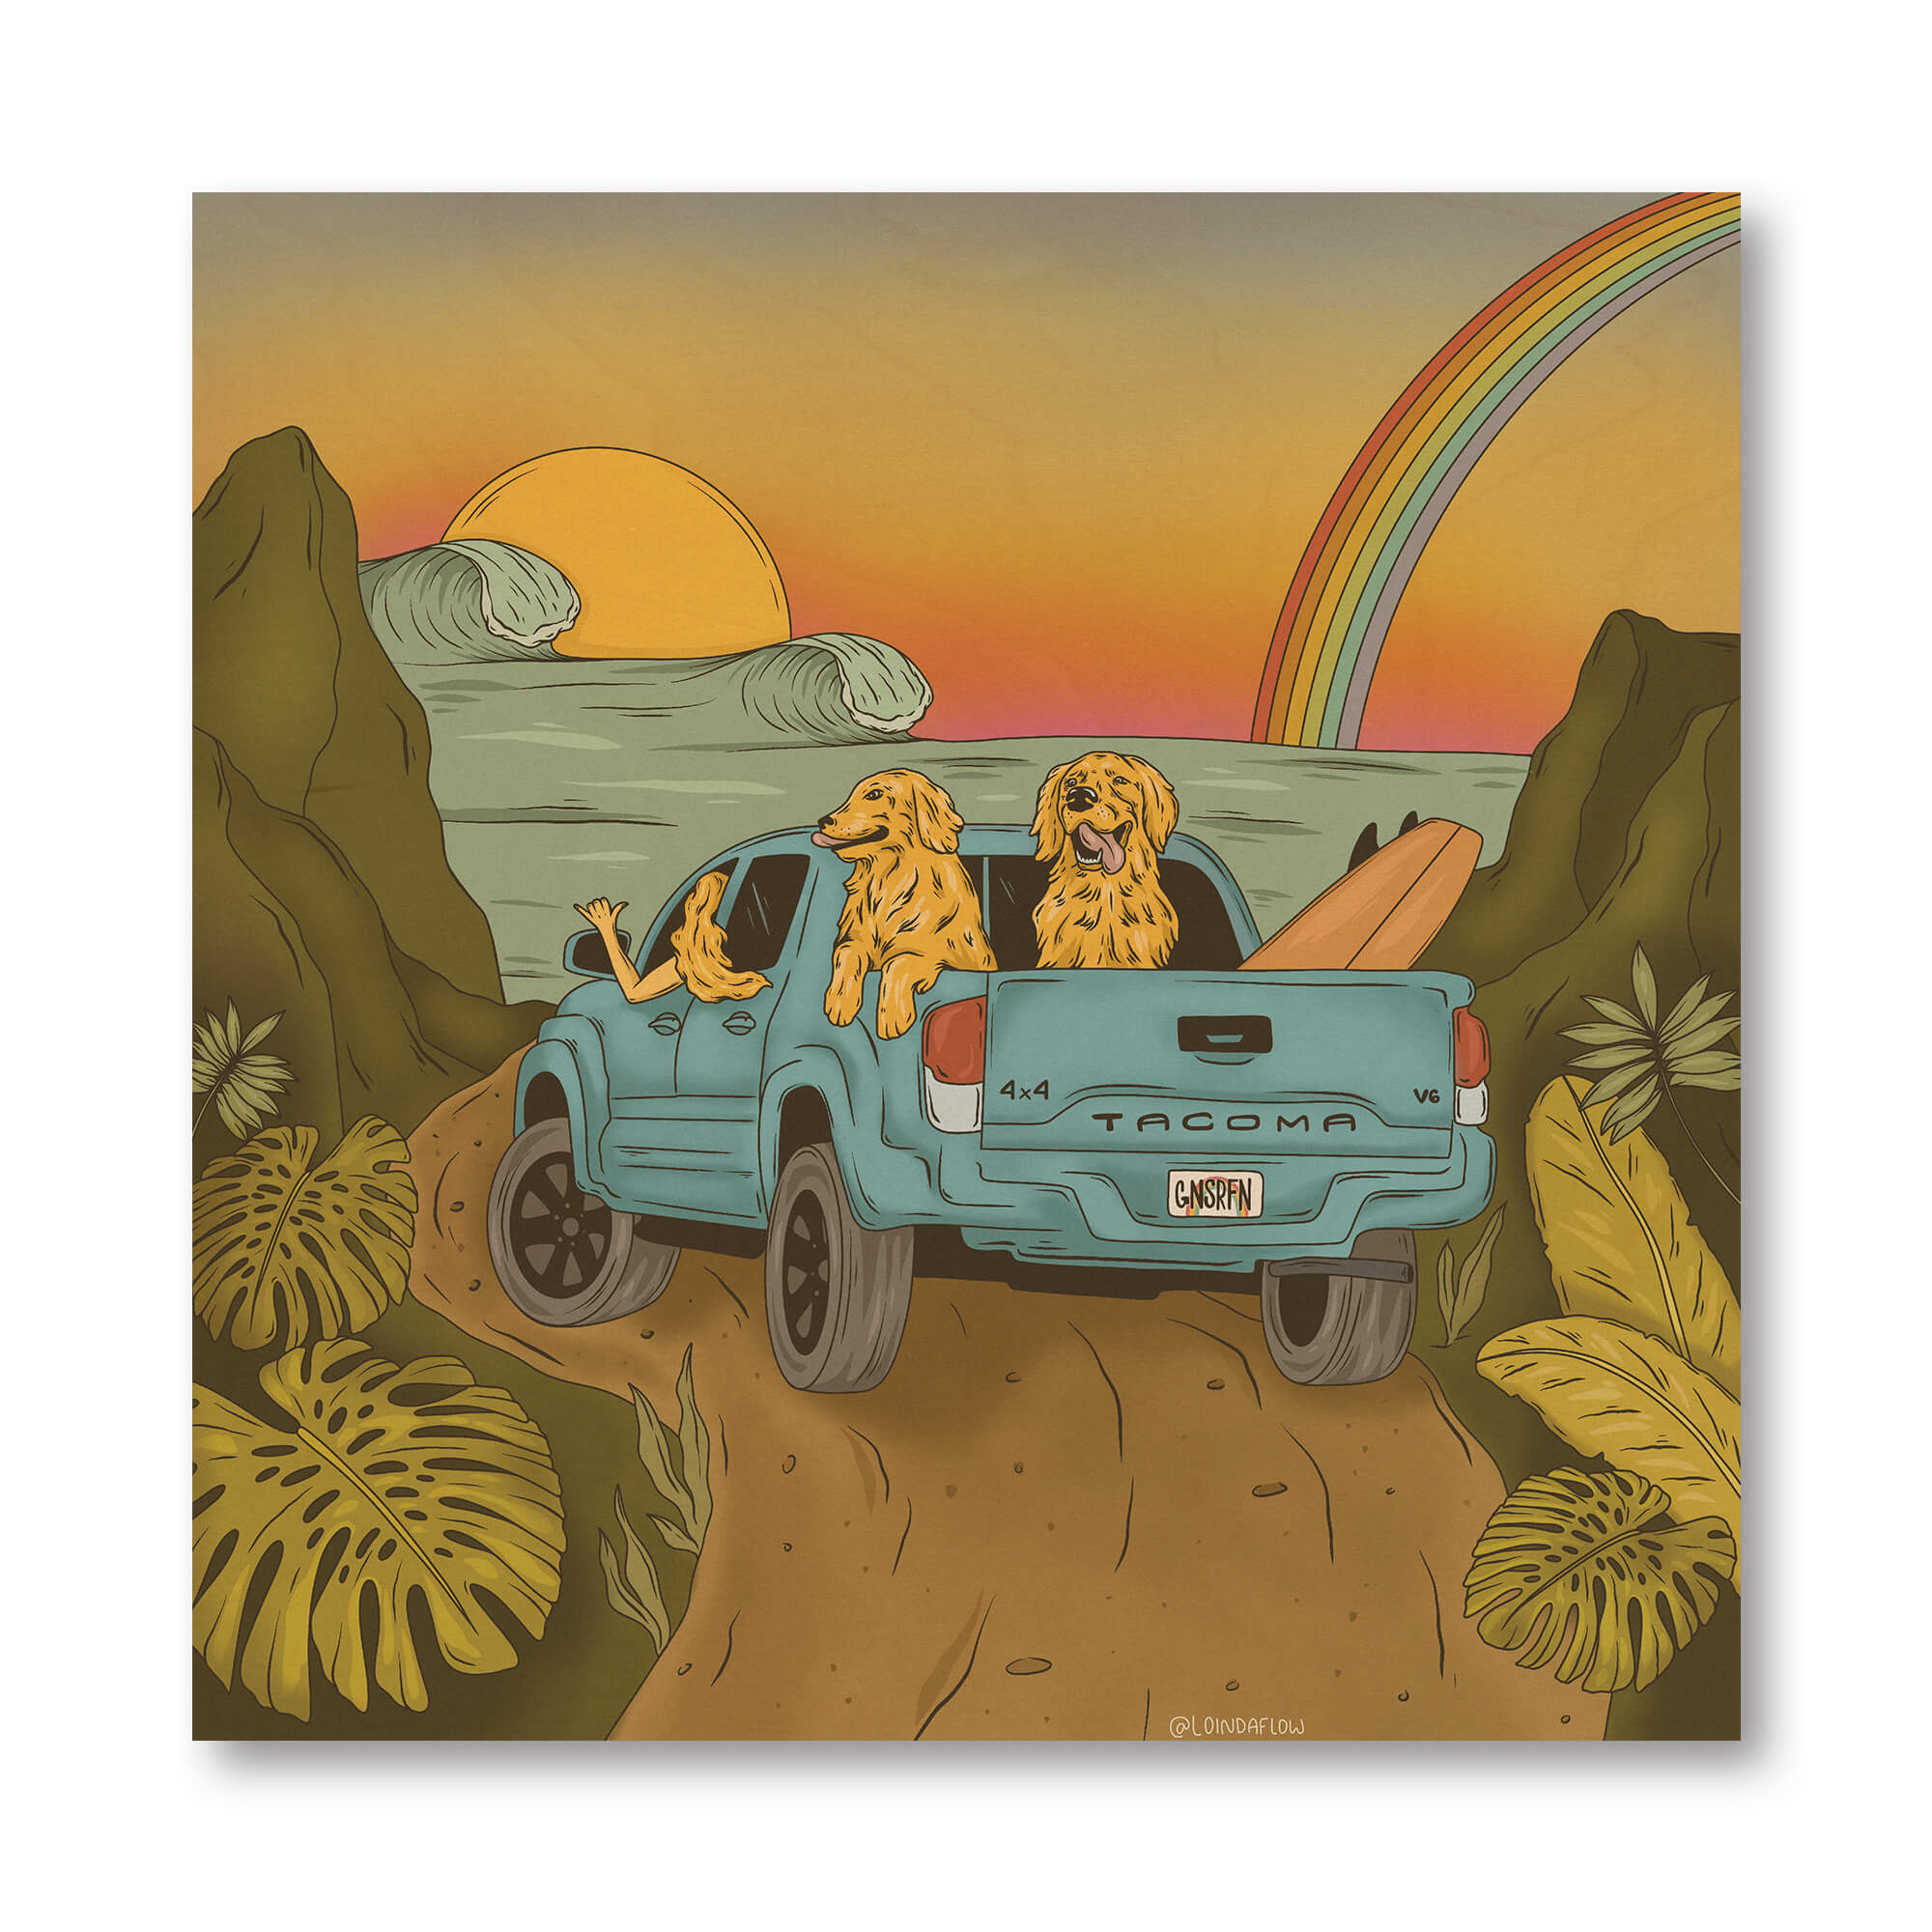 Wood art print of a woman driving a blue truck with her dogs and surfboard by Hawaii artist Laihha Organna